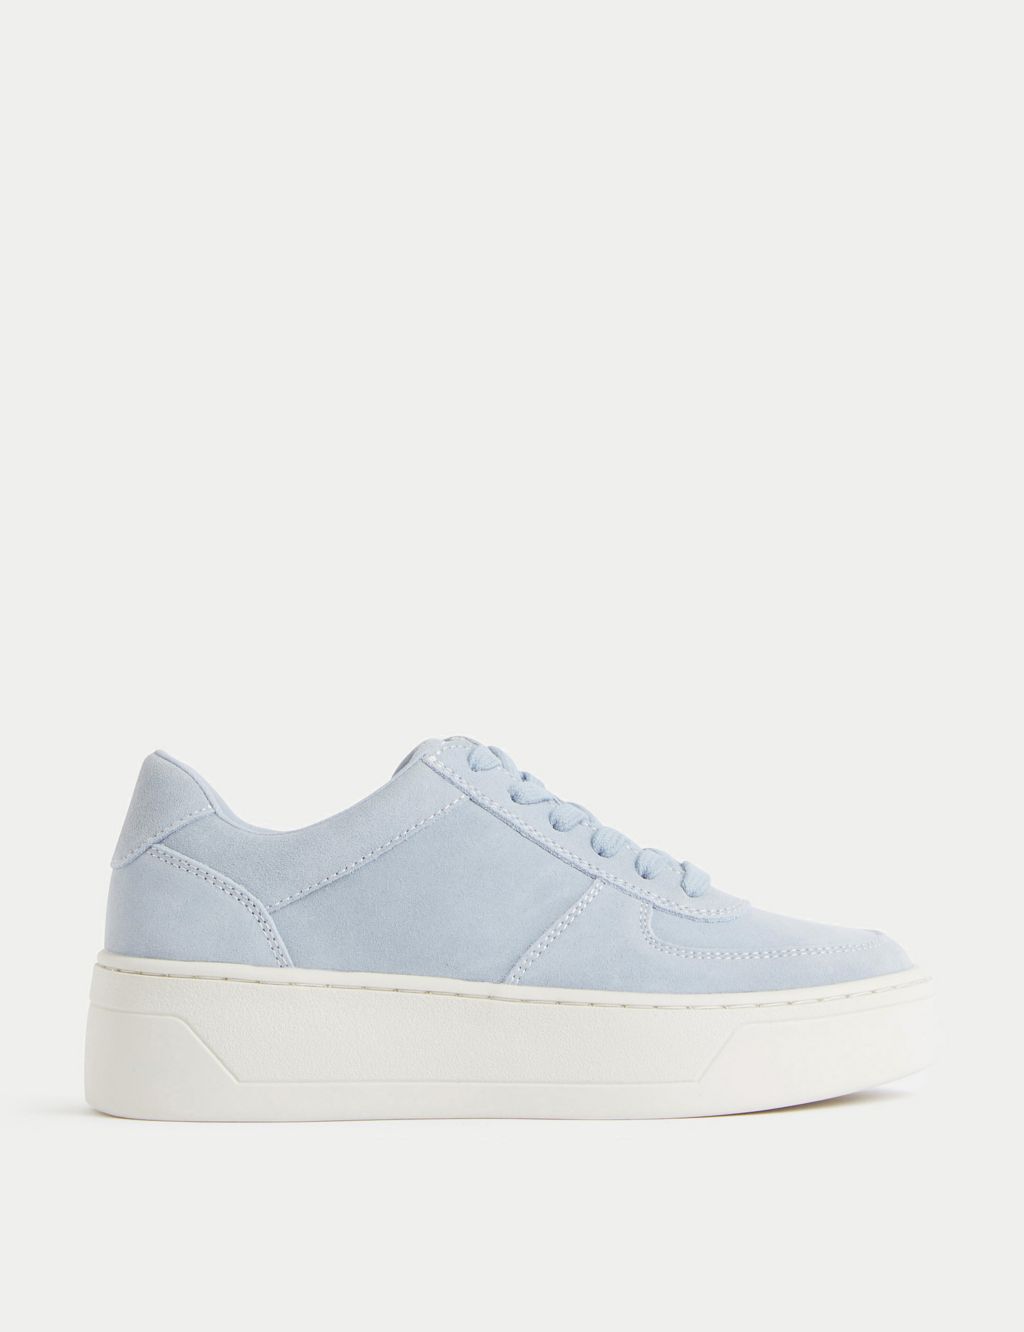 Suede Lace Up Chunky Trainers image 1